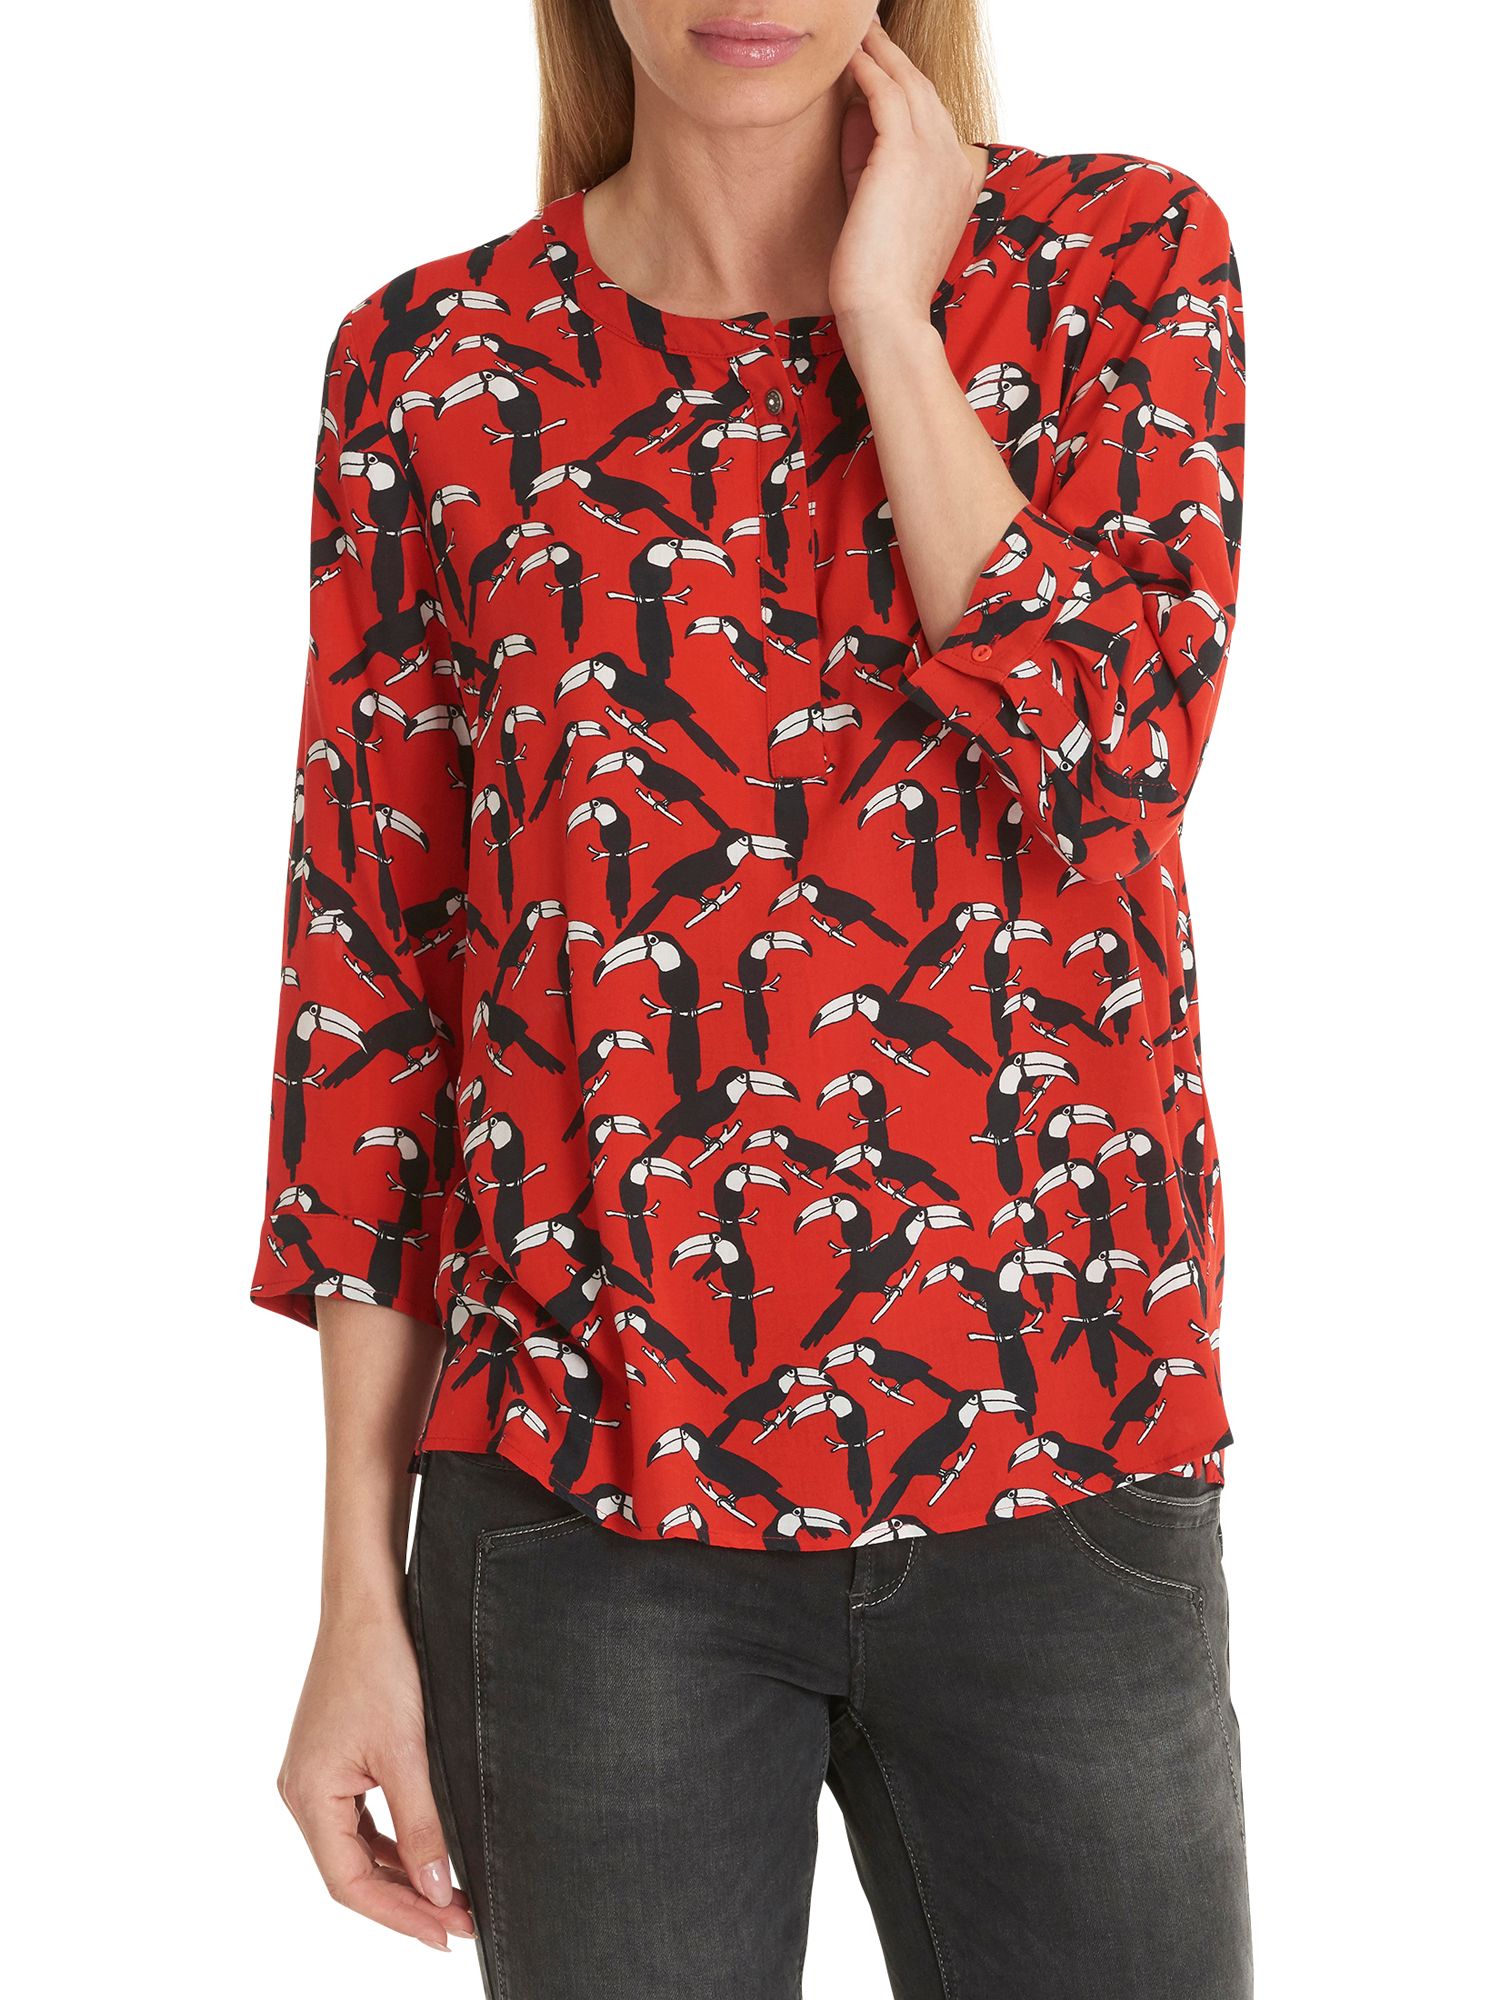 Betty Barclay Toucan Print Blouse, Red/Black